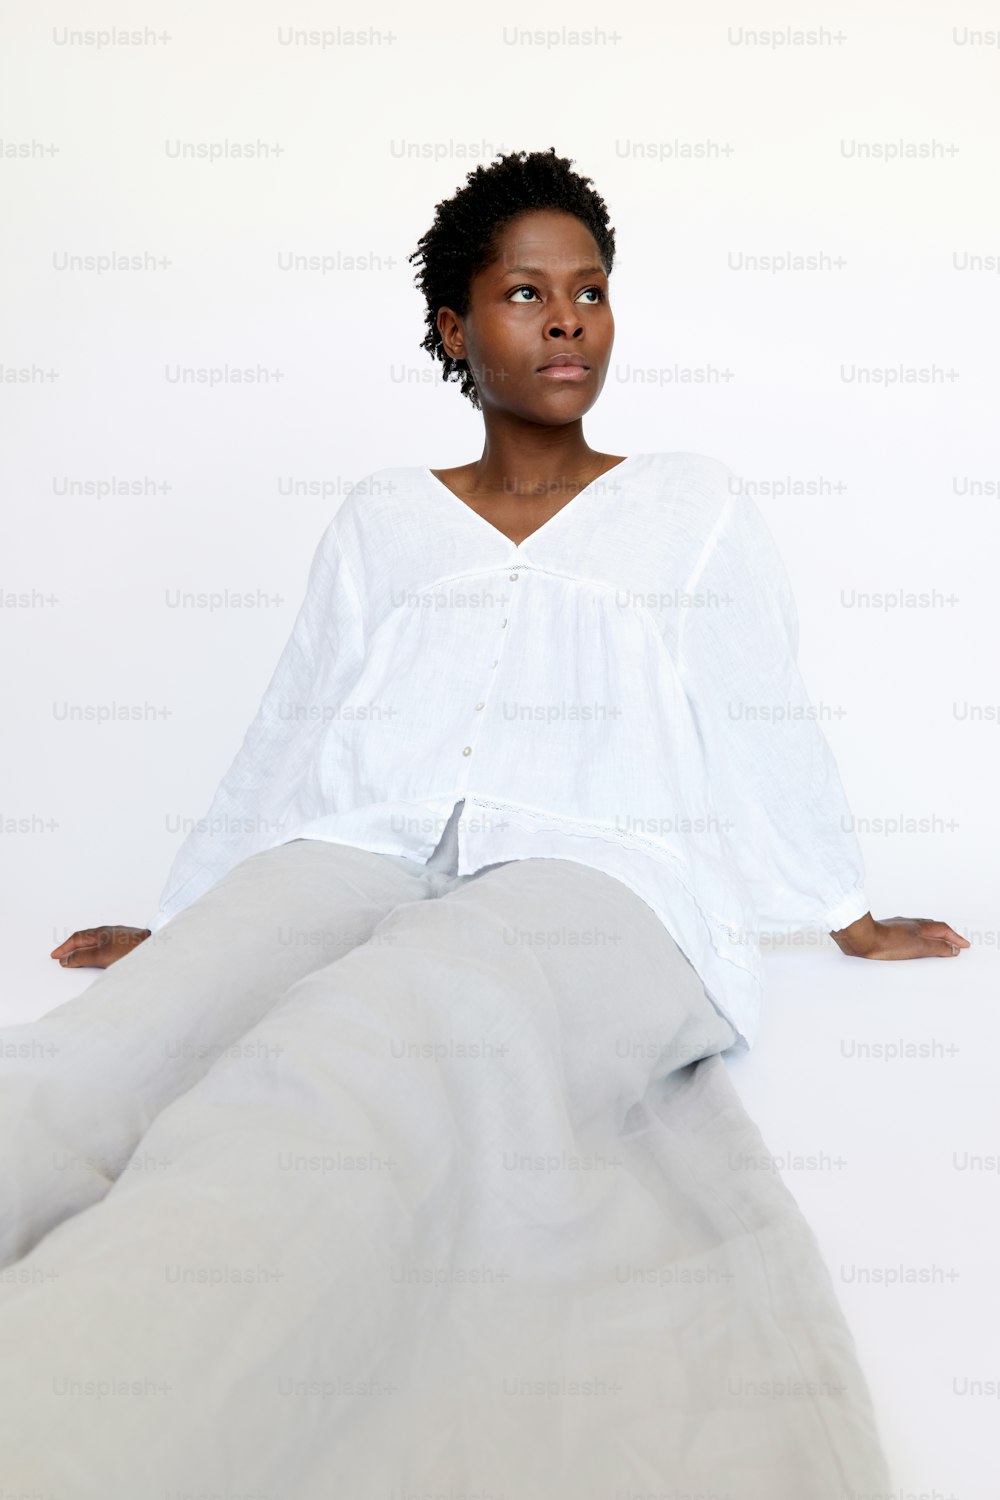 a woman sitting on the ground with her legs crossed